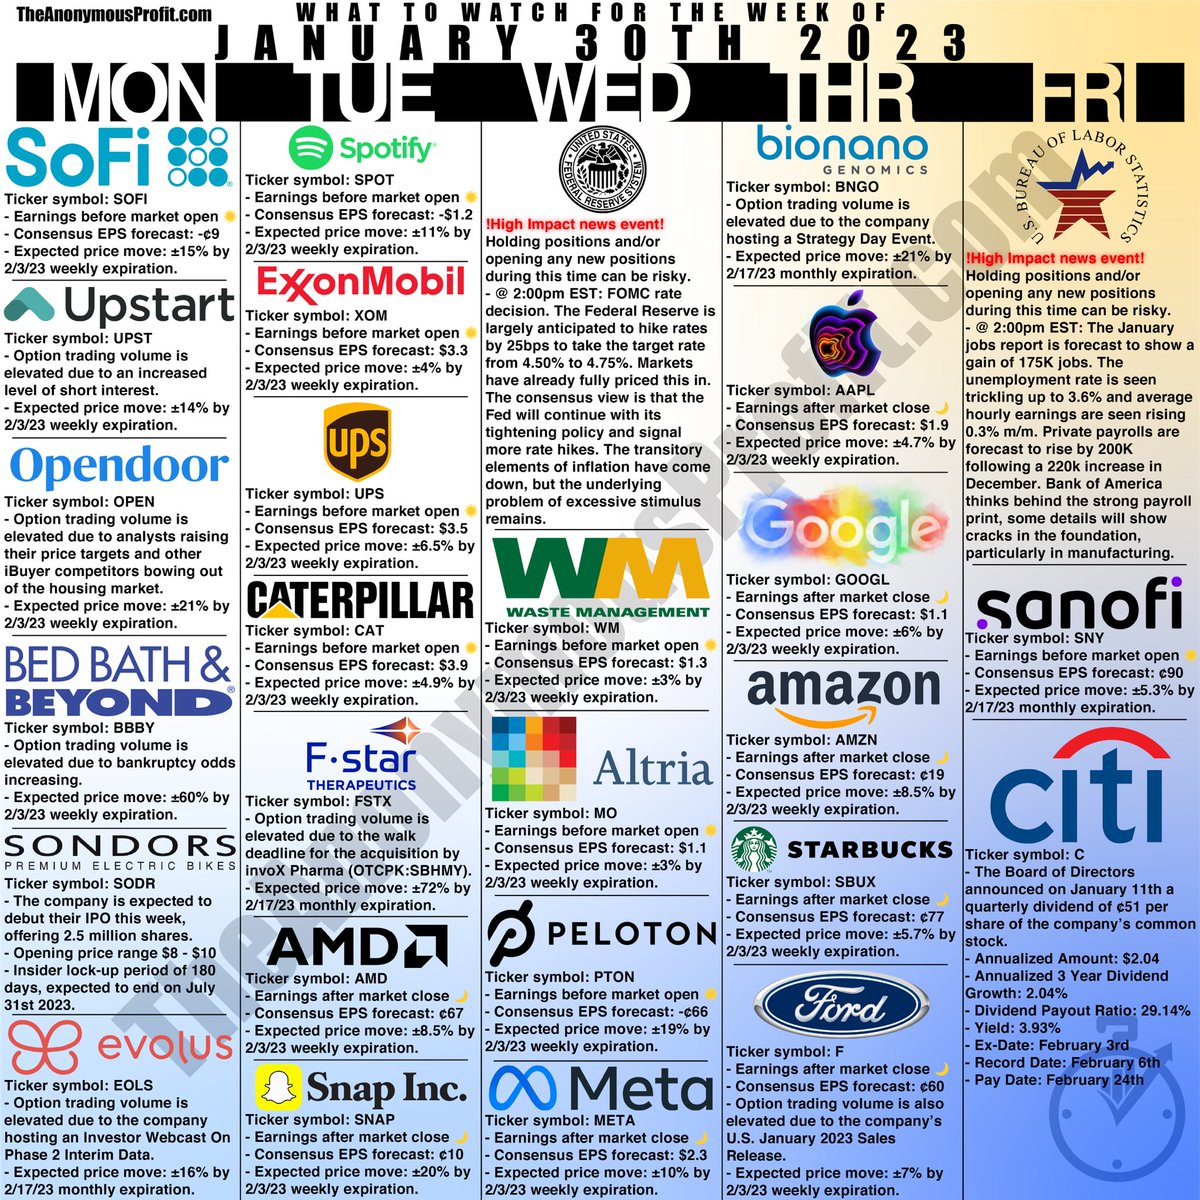 Get ahead of the market for the week beginning 1/30/23, by checking out my watchlist. Visit TheAnonymousProfit.com to see the full watchlist. #FederalReserve #StocksToWatch #OptionsTrading #economics $spy $qqq #interestrates #earningsseason $aapl $amzn $googl $sbux $meta $pton